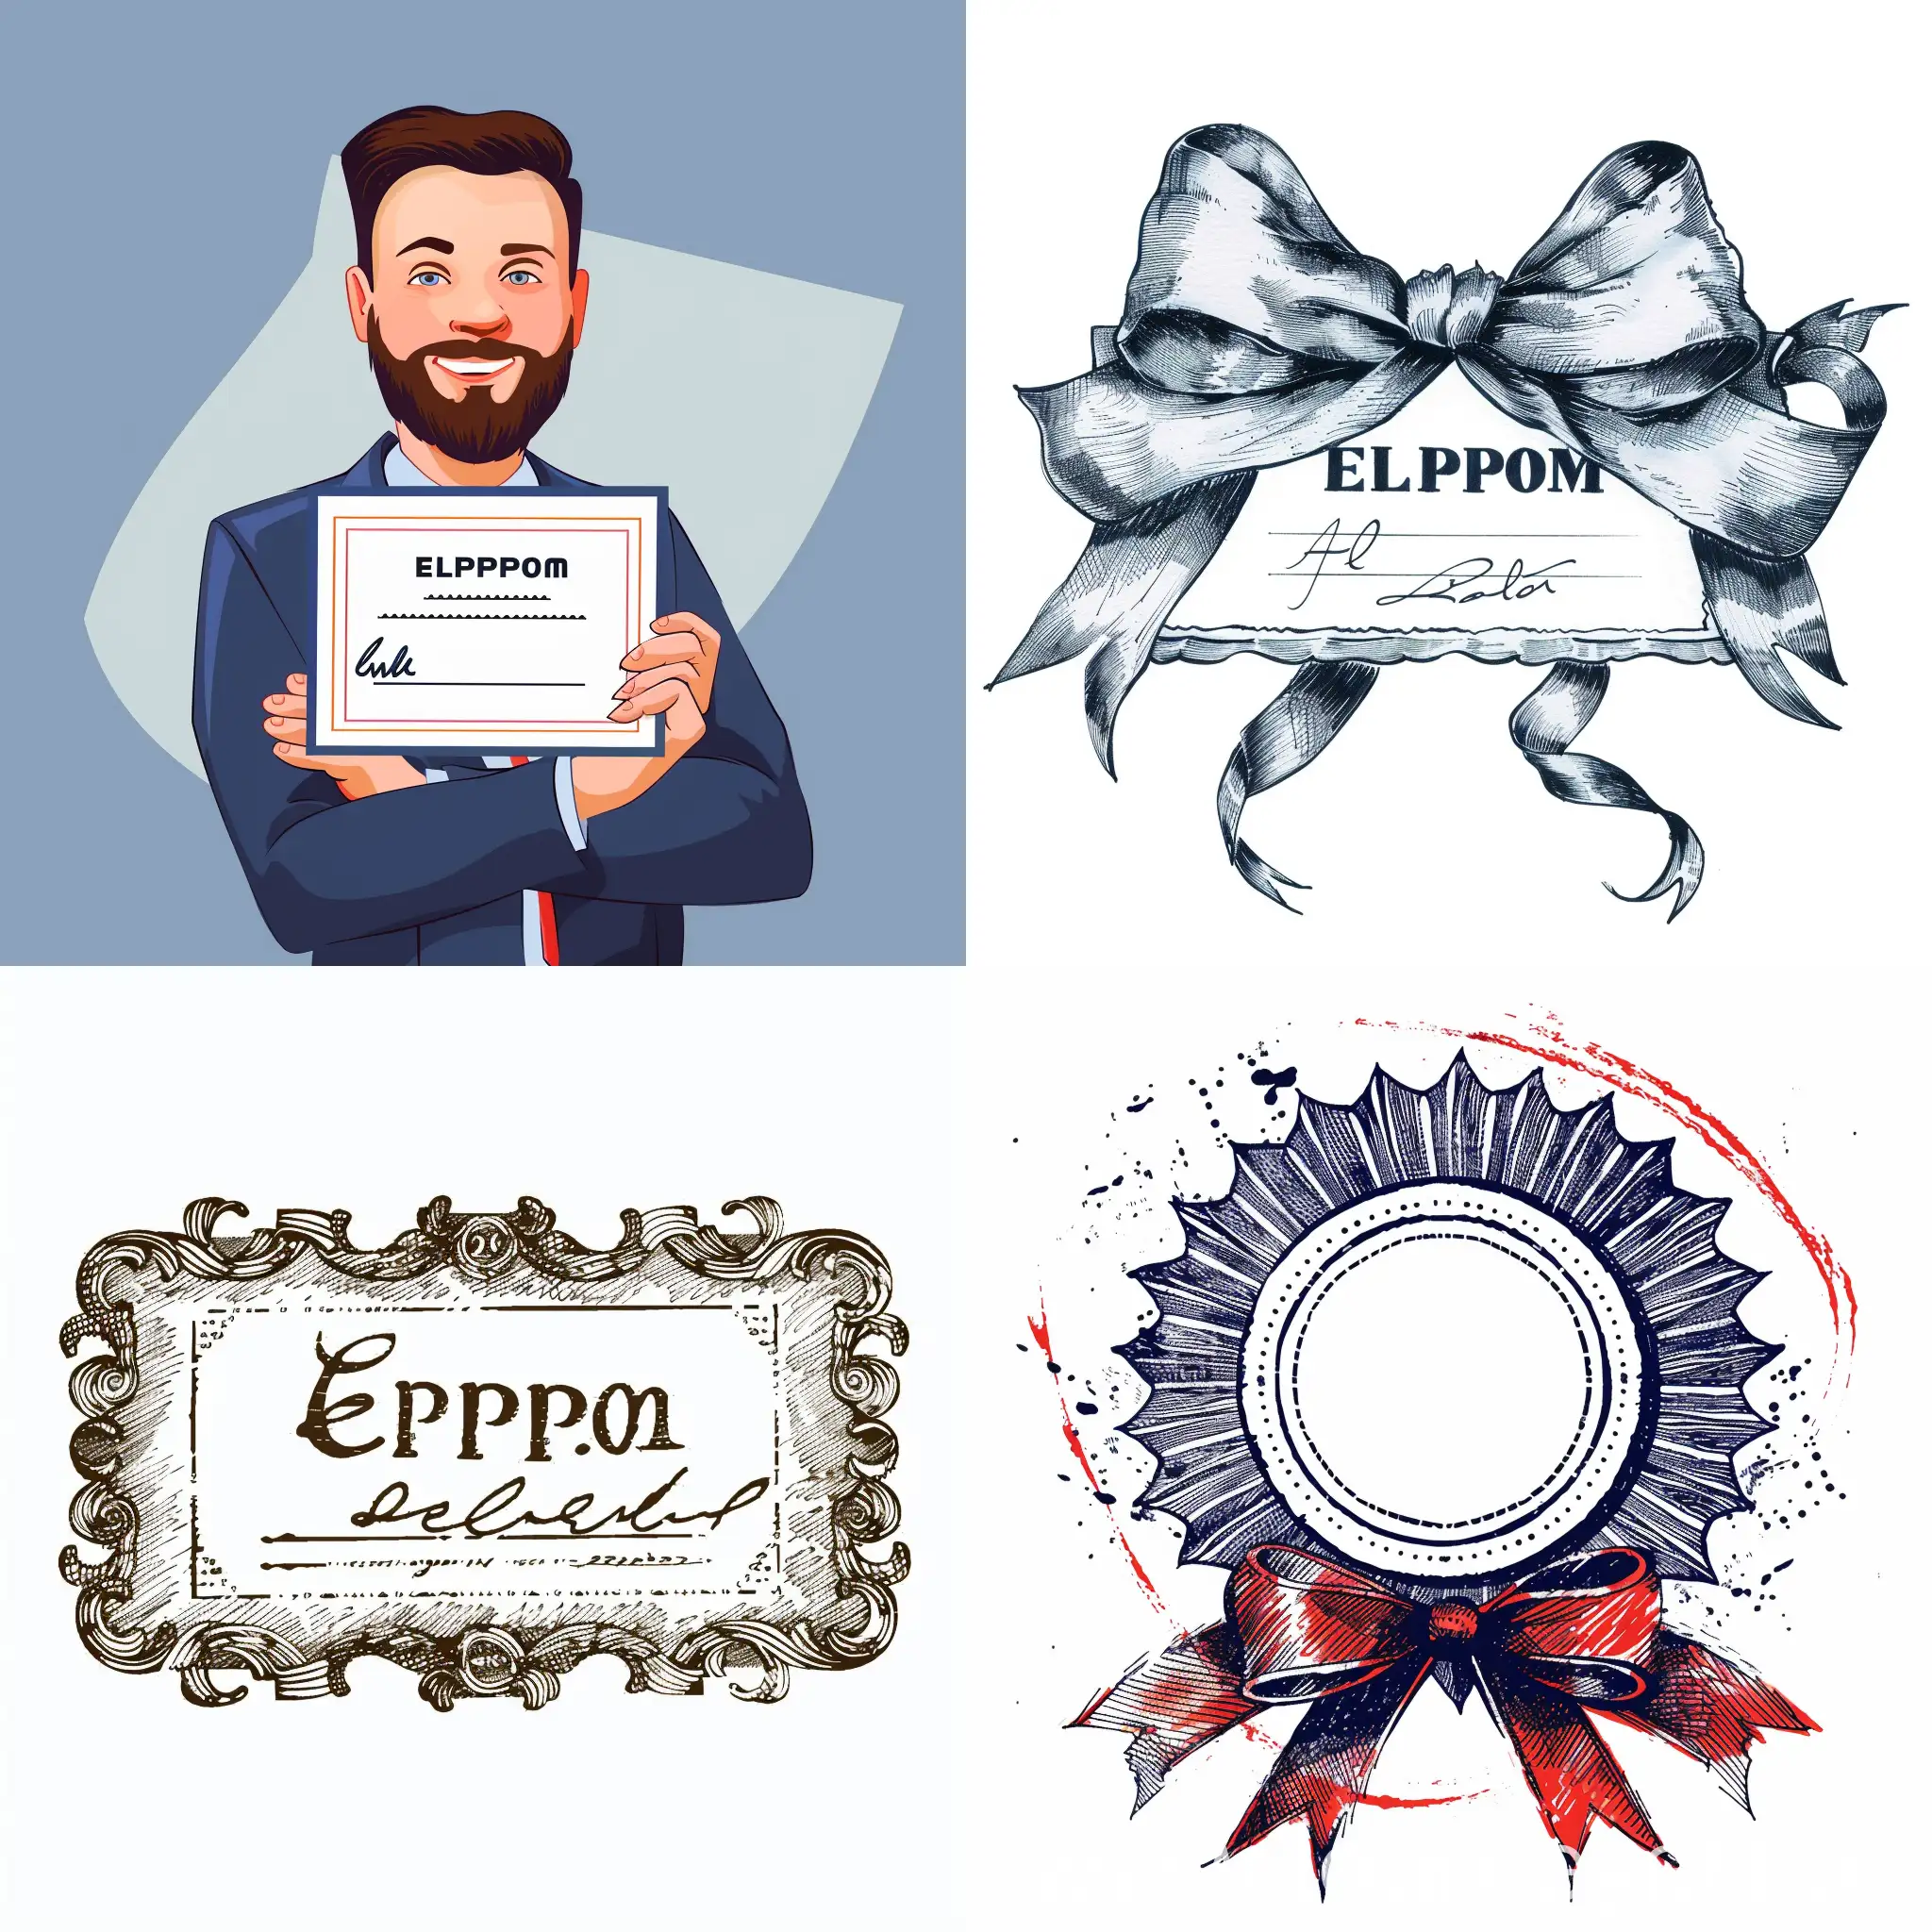 draw a certificate of Elprom dealer